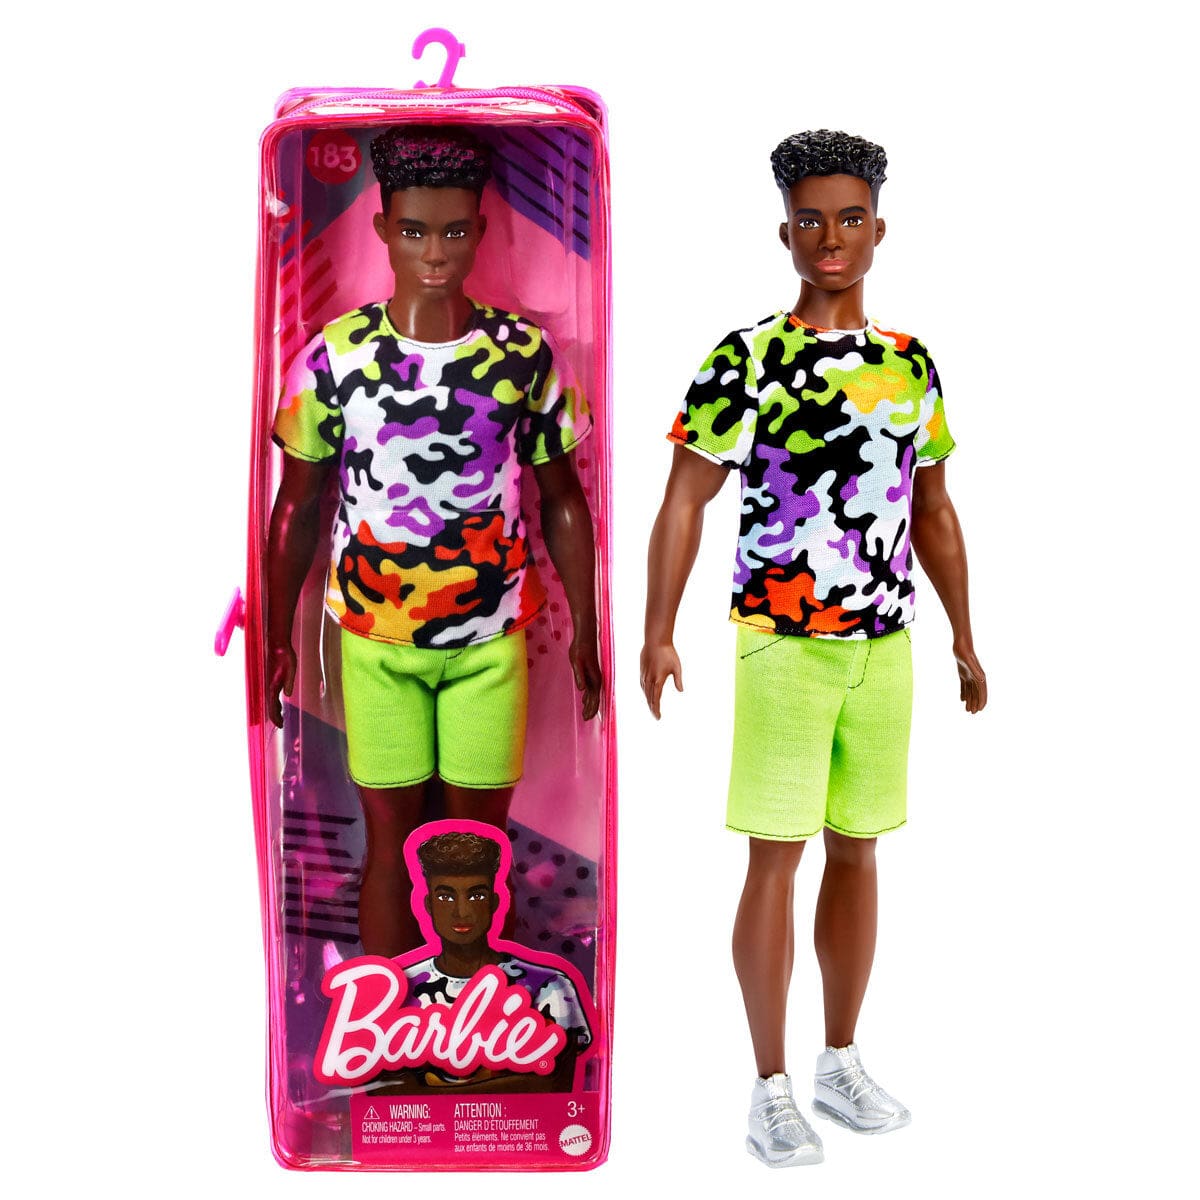 Barbie Ken Fashionistas Doll - Camo Top and Neon Green Shorts